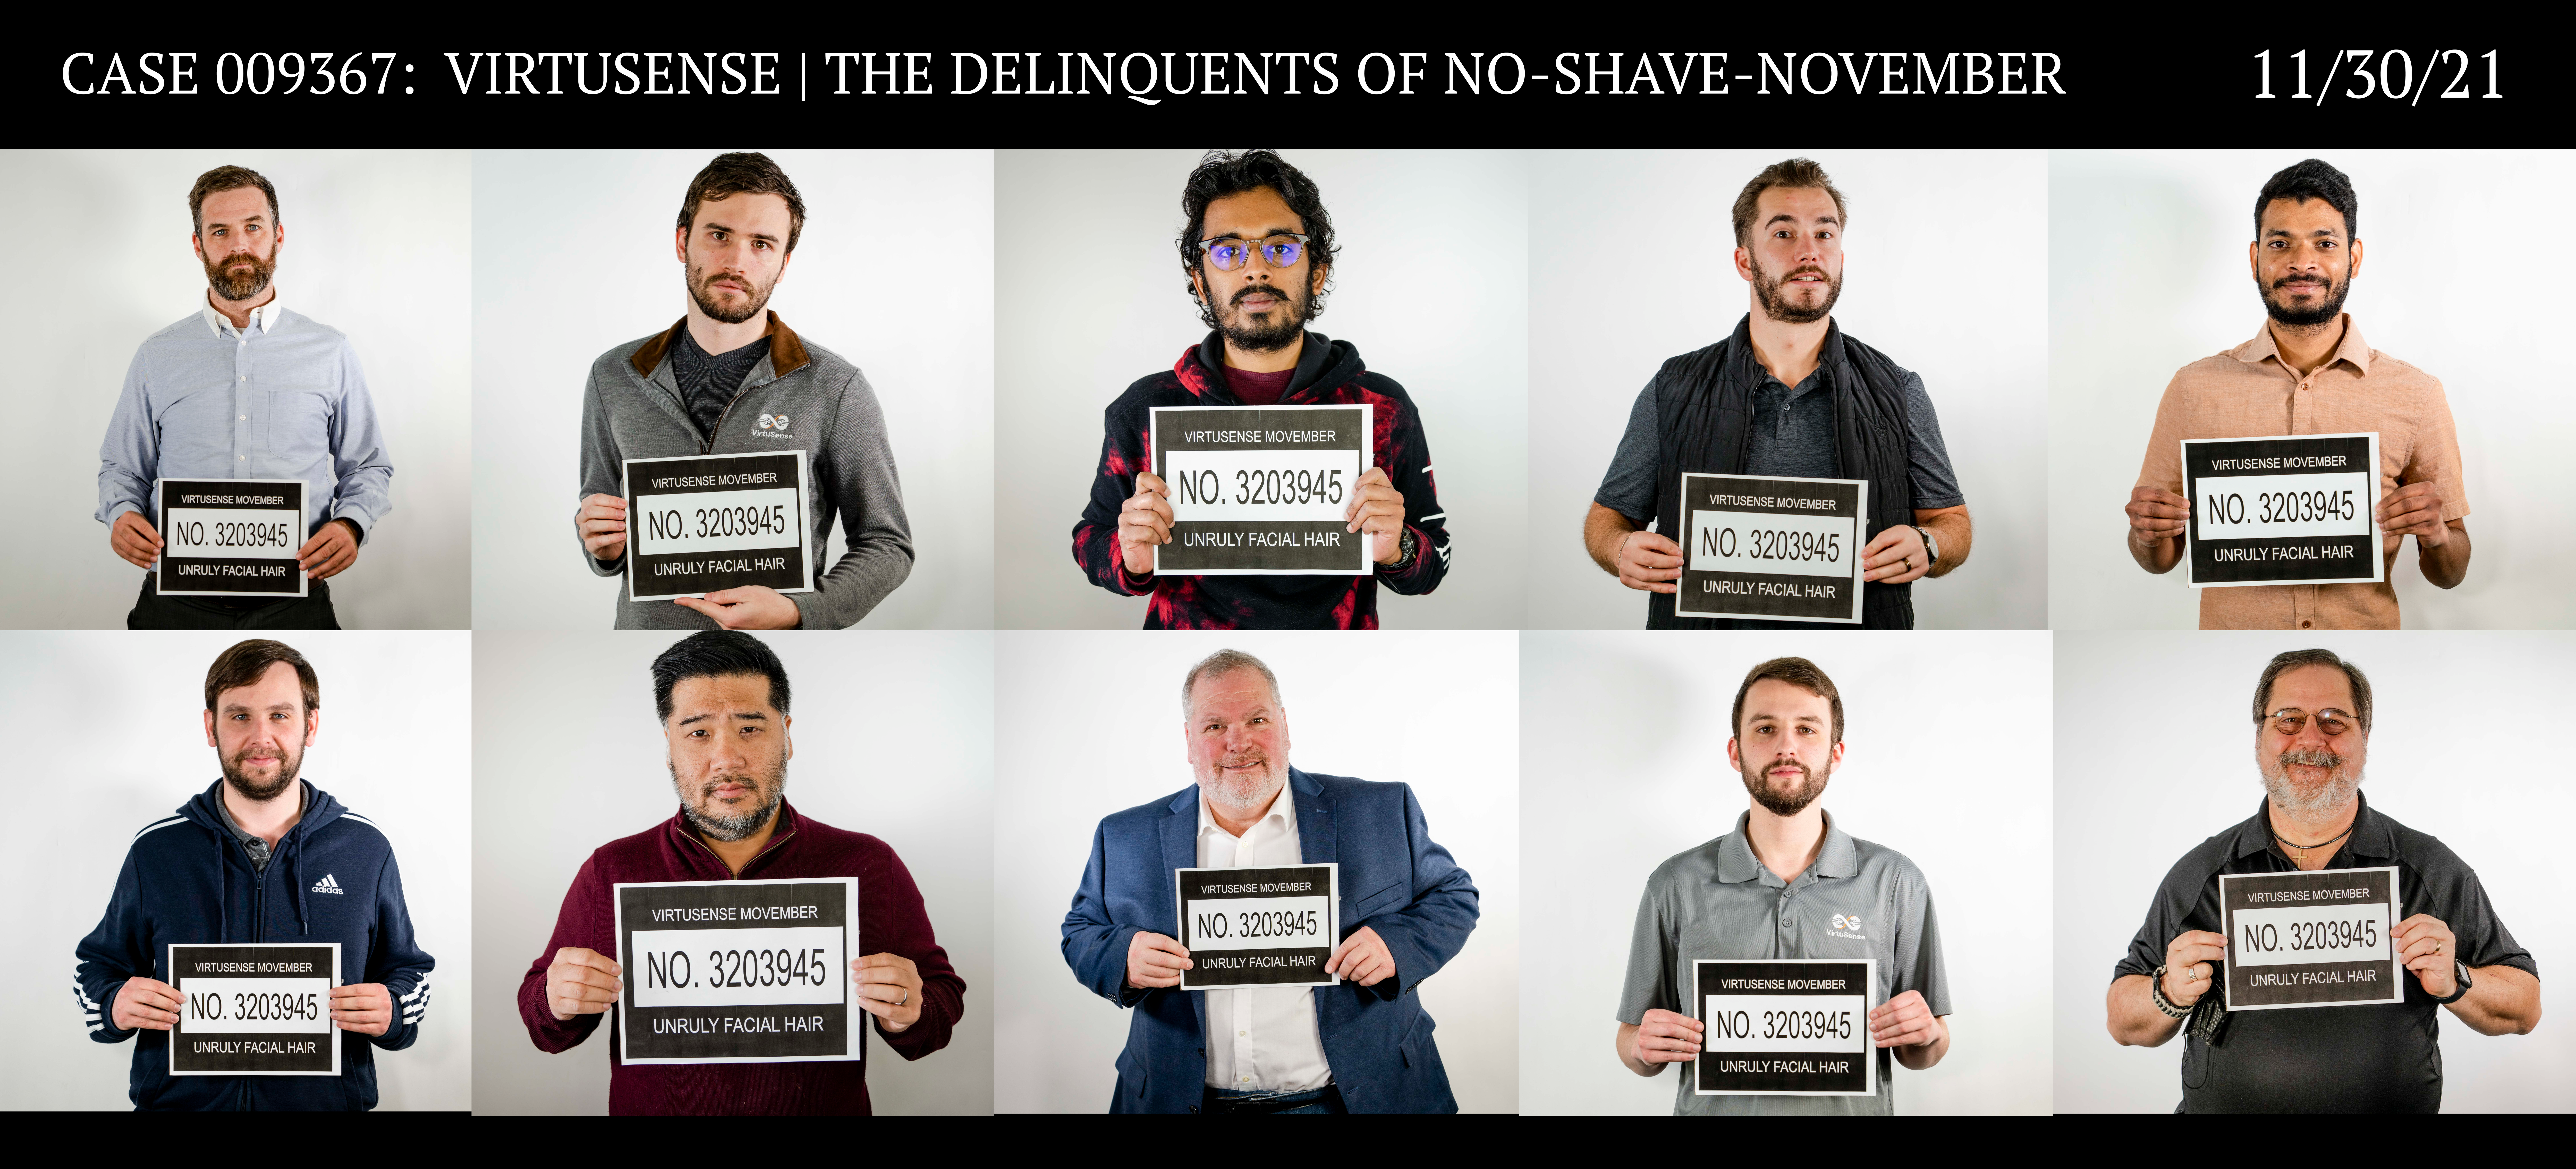 A collage of mug-shot style photos of 10 men from VirtuSense with their facial hair grown out. 